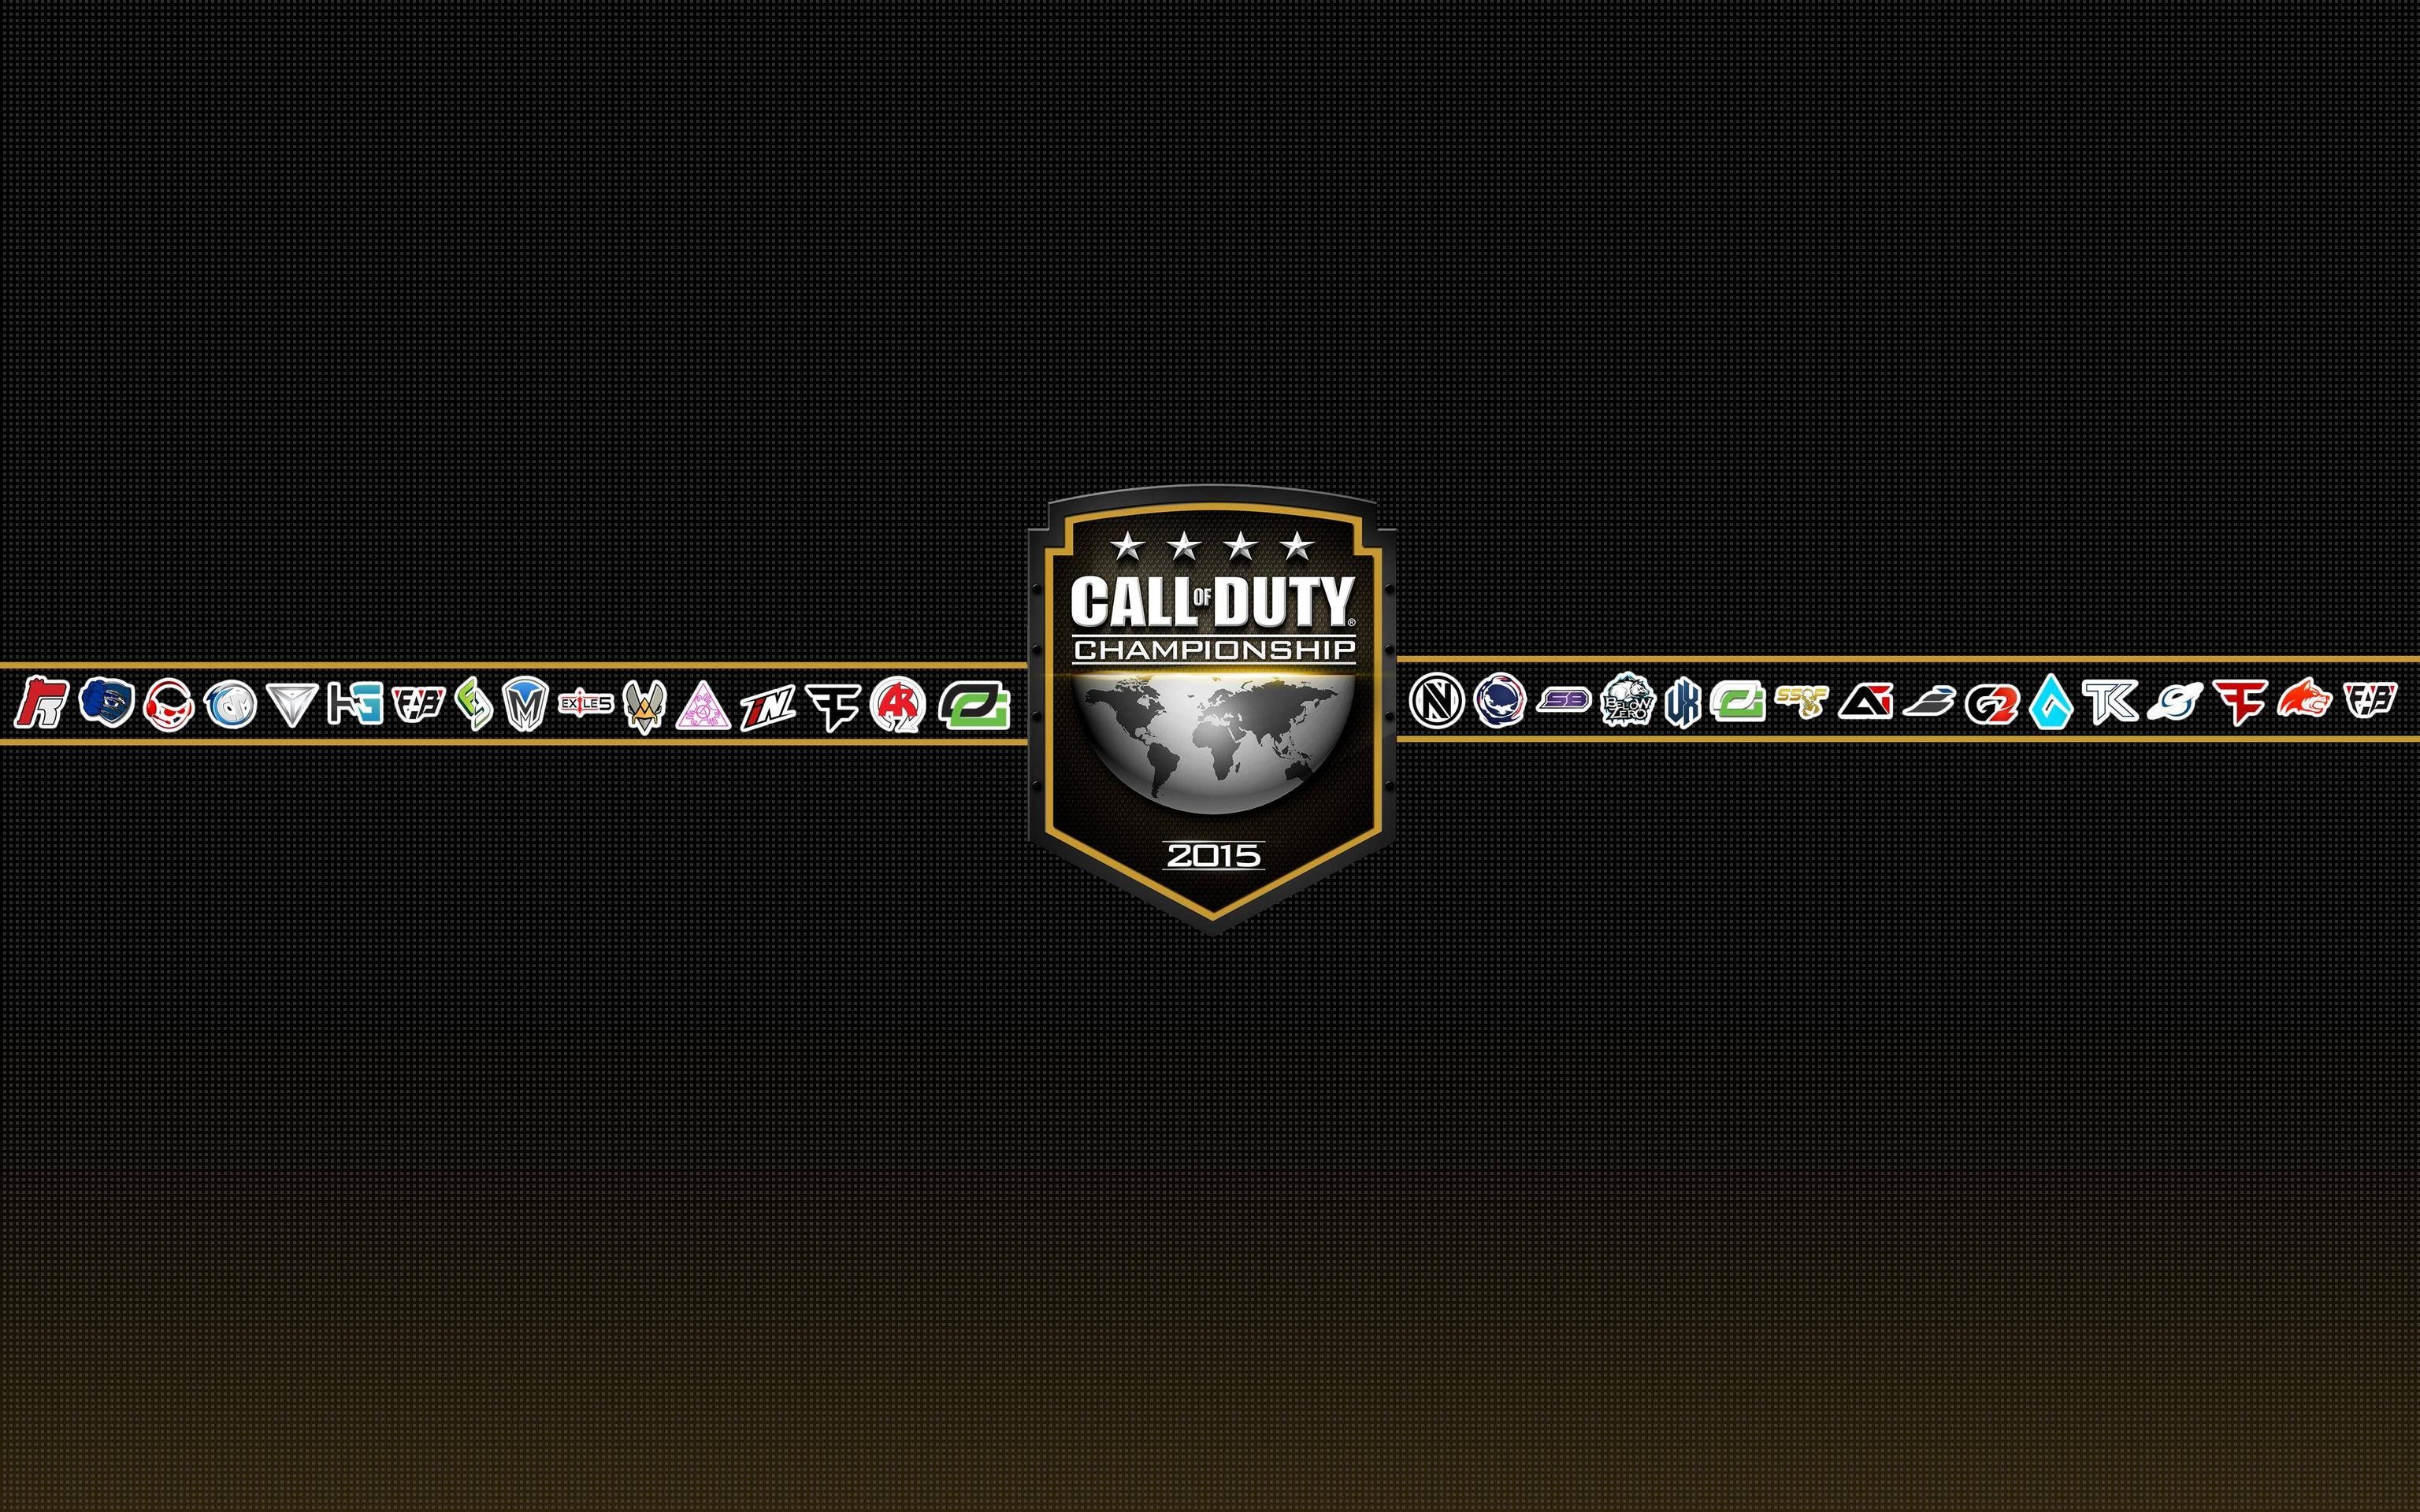 3072x1920 Quick CoD Champs wallpaper for y'all : CoDCompetitive